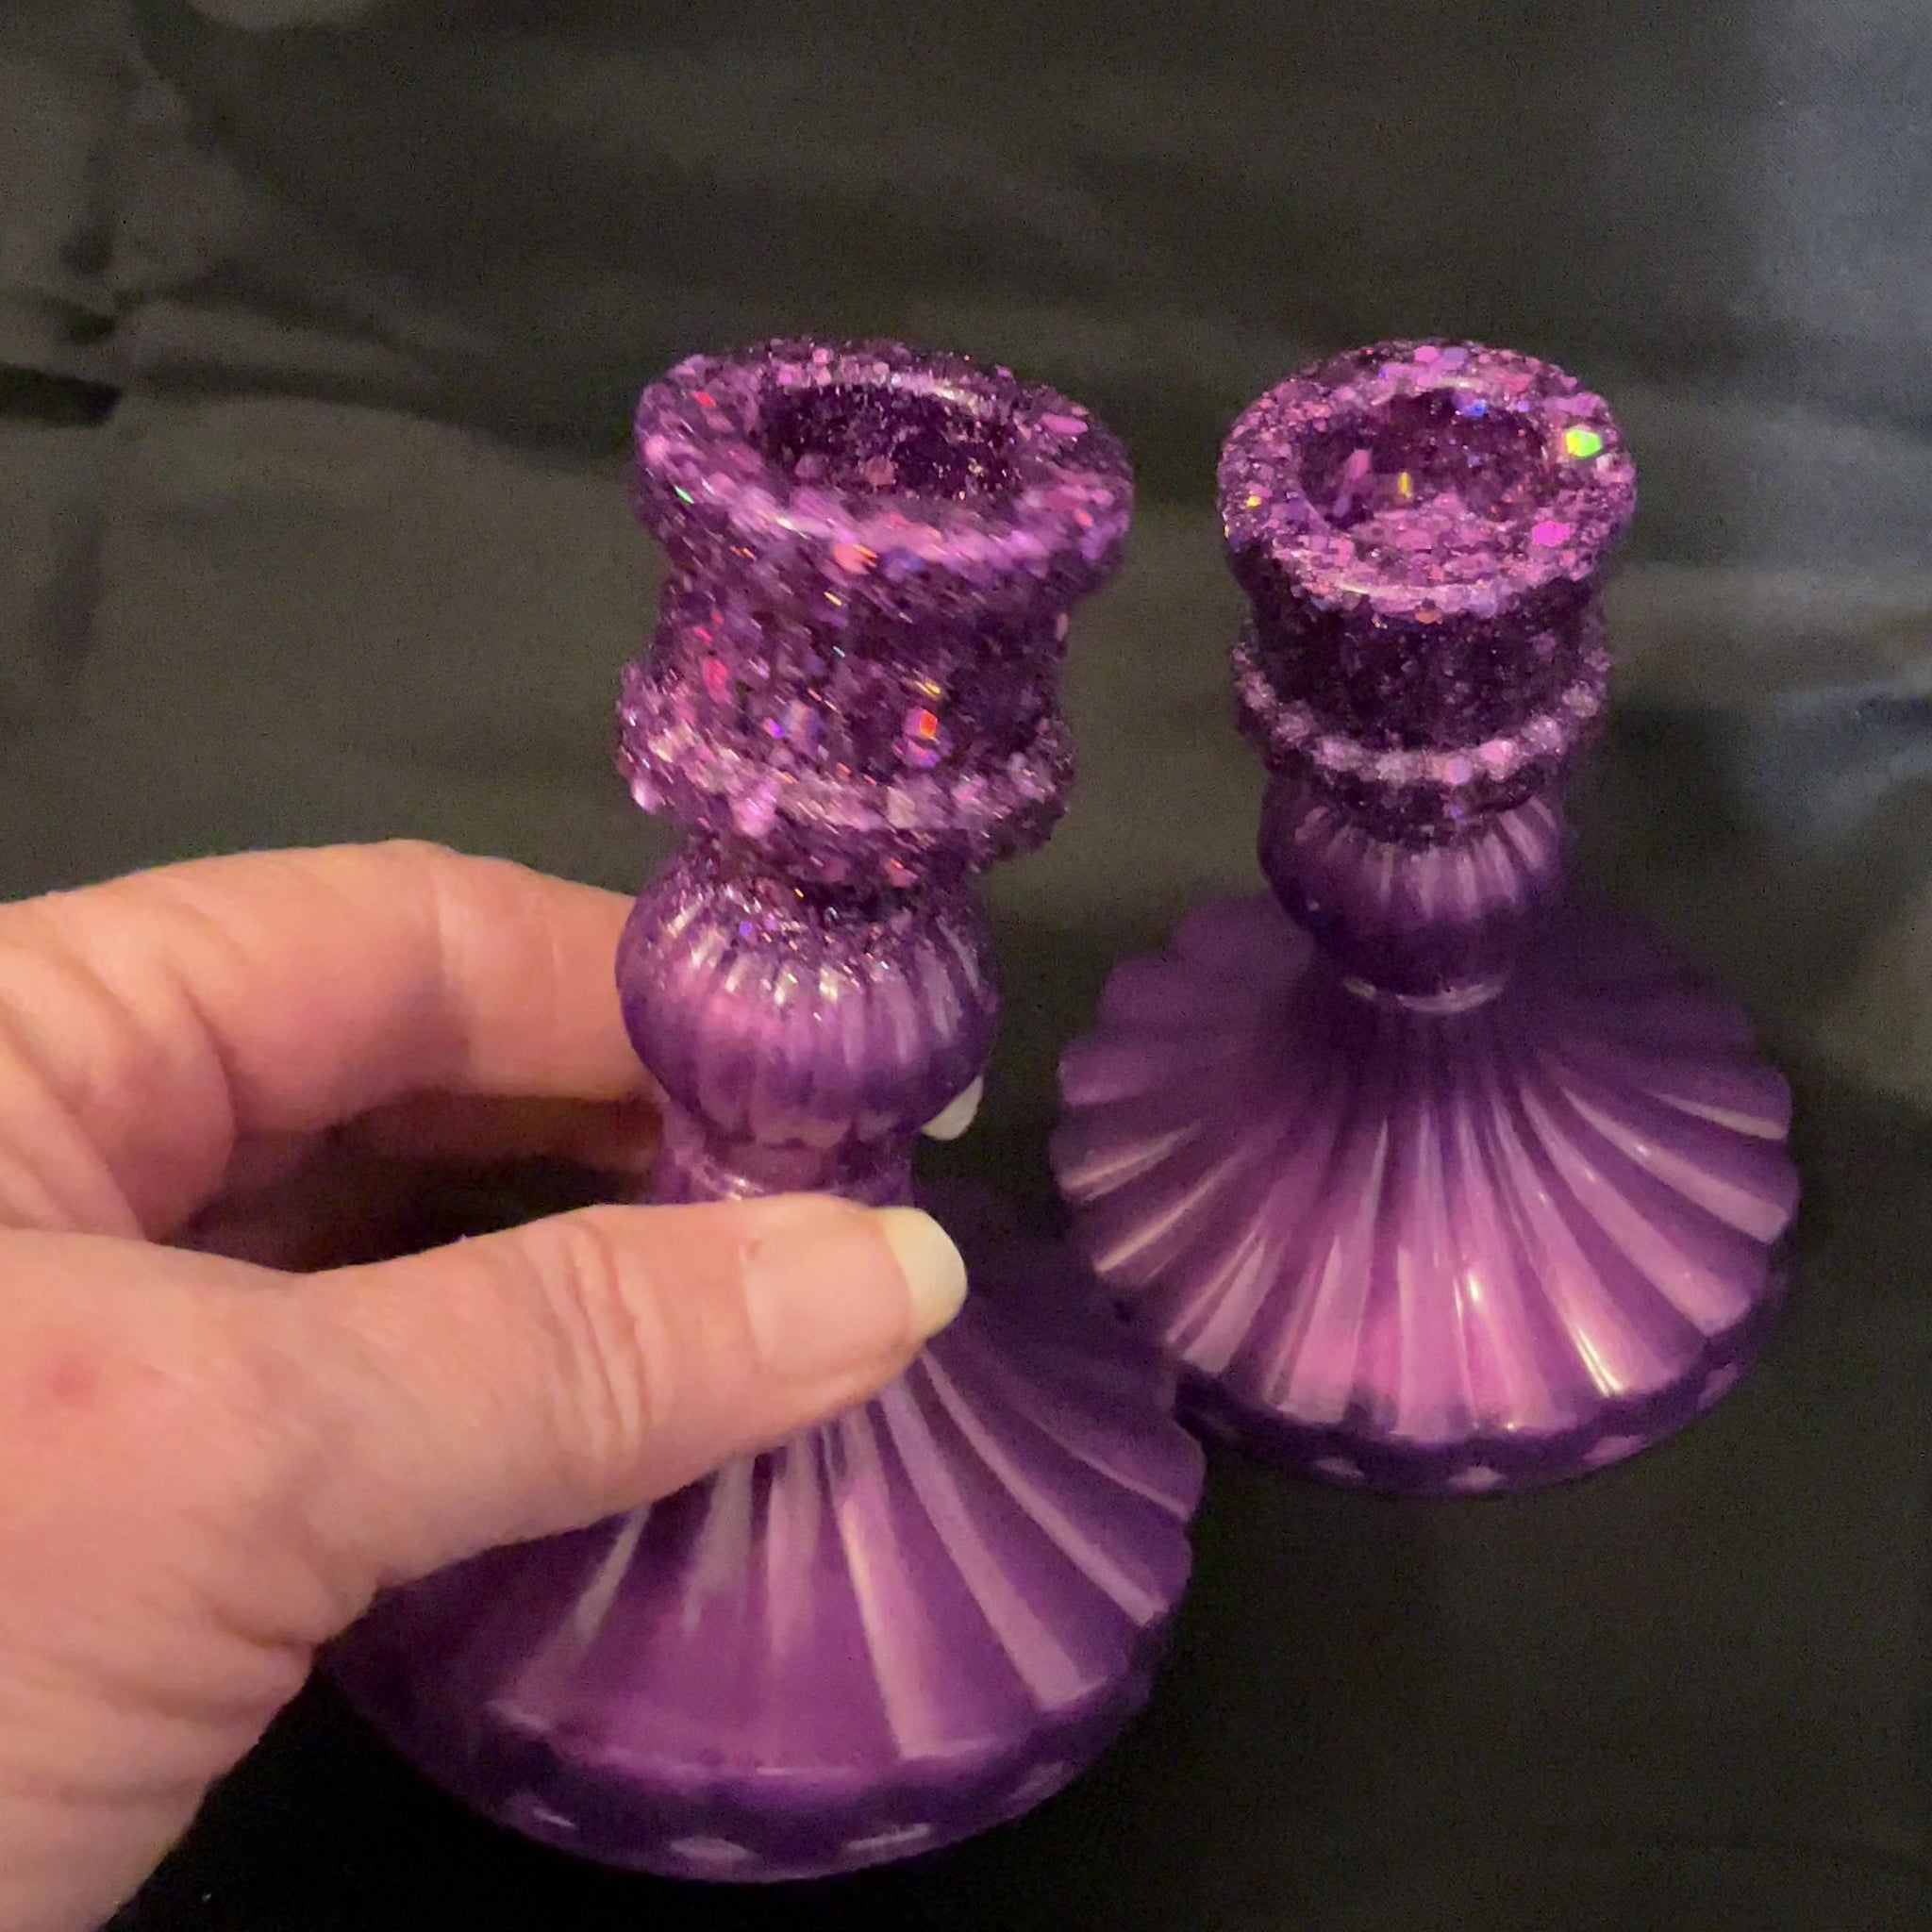 Vintage Style Handmade Pearly Lilac Purple Glitter Resin Candlestick Holders video showing how the glitter sparkles in the light.